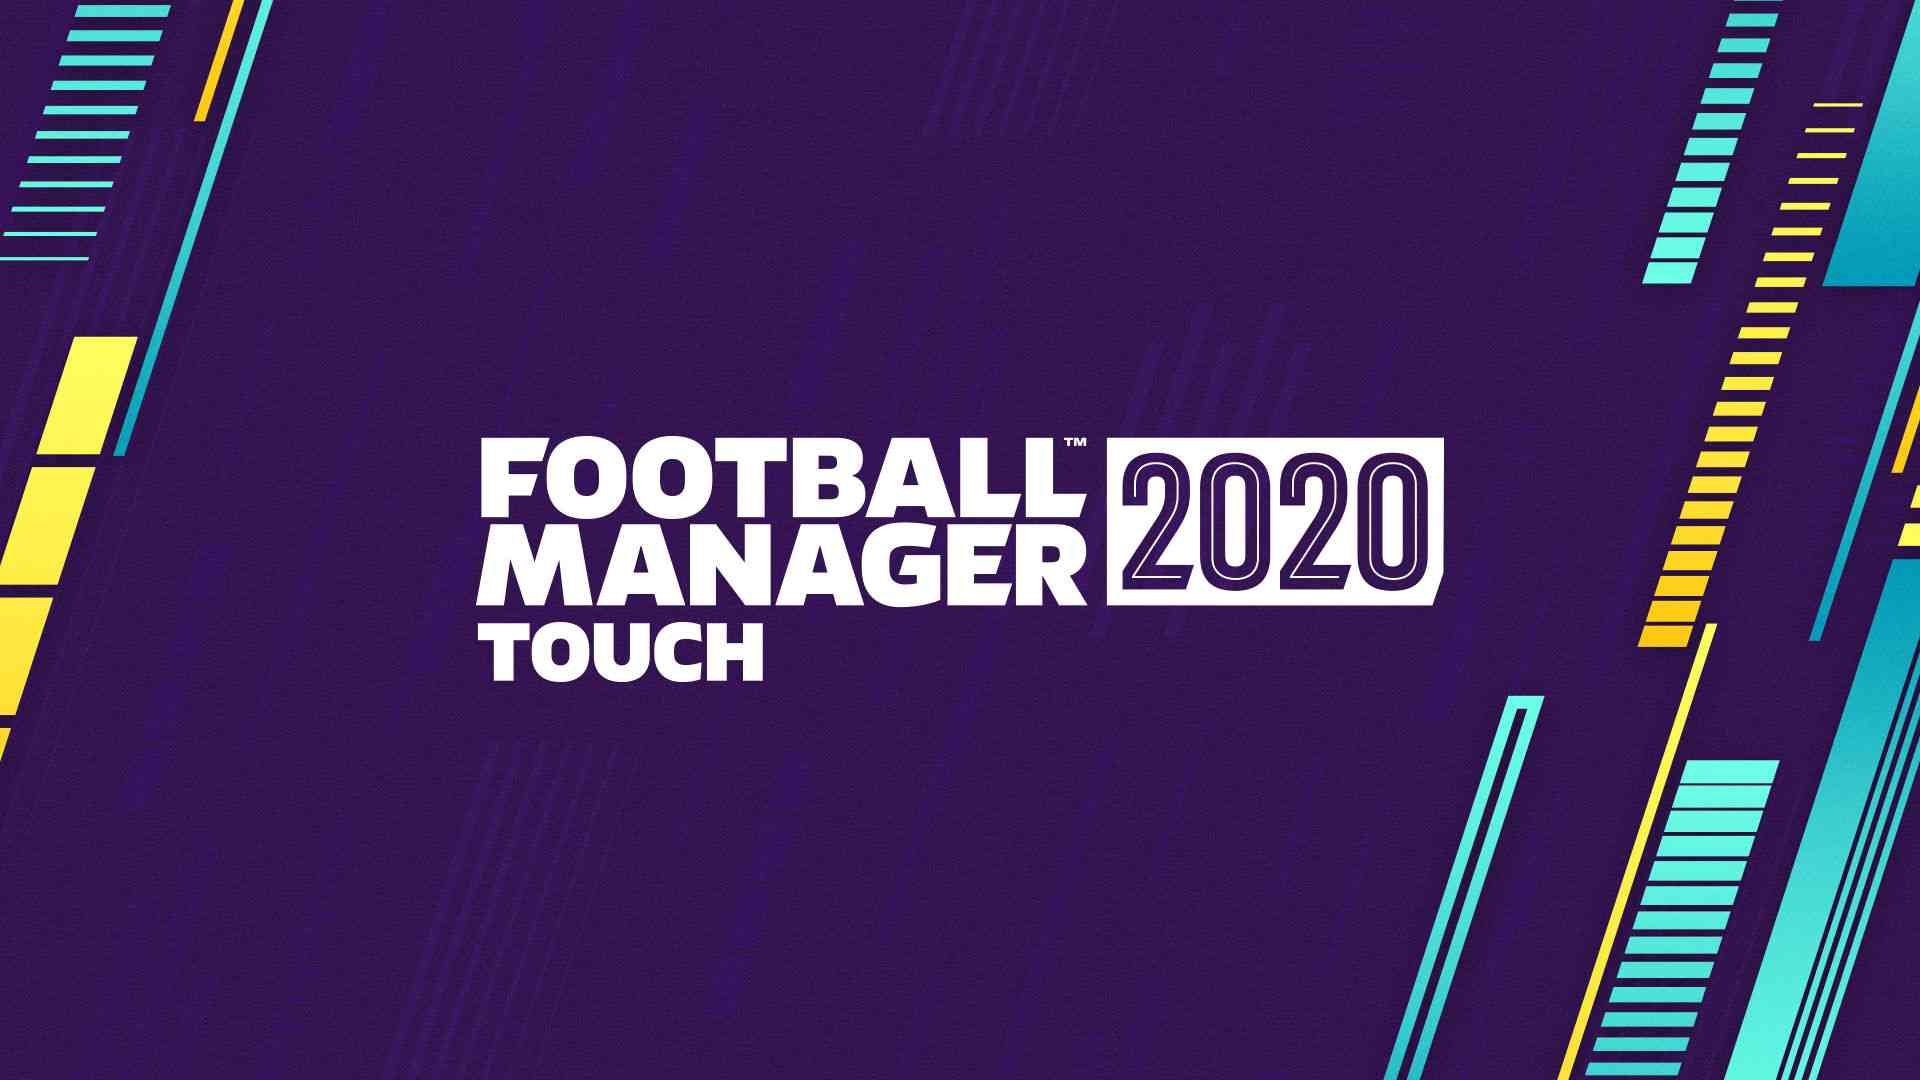 fm20 touch out now on nintendo switch 3552 big 1